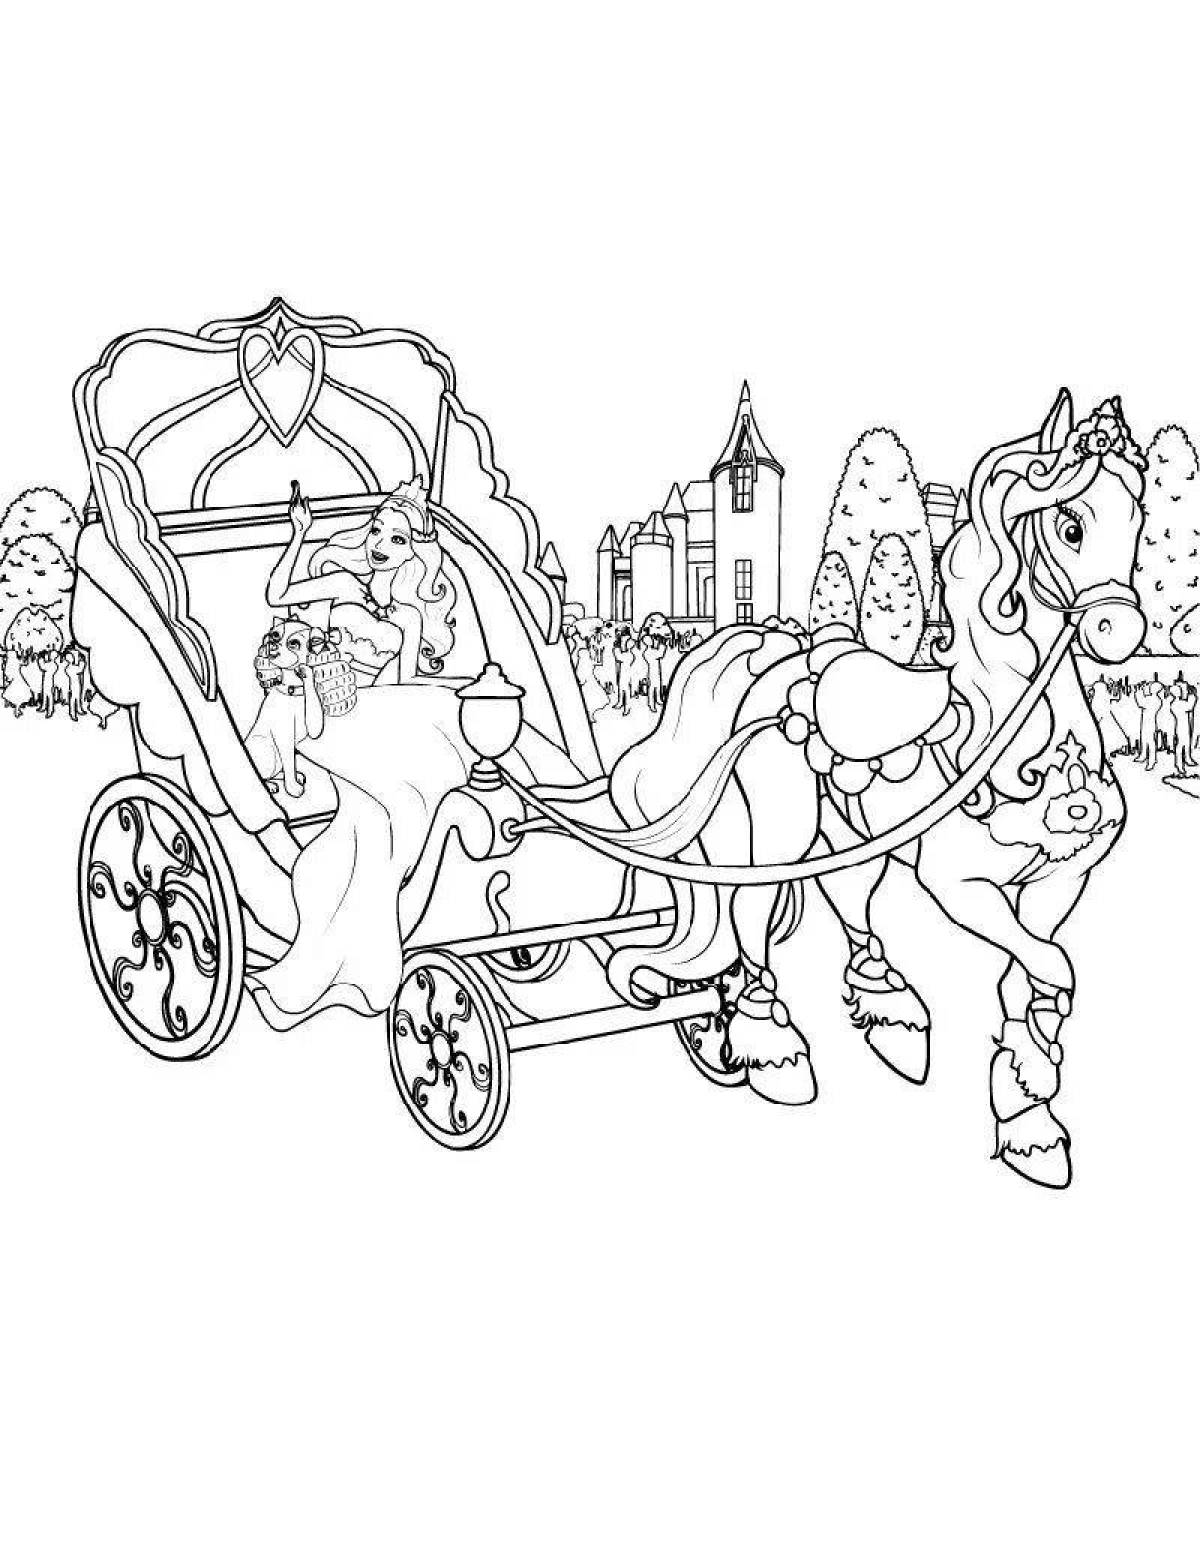 Coloring page mesmerizing barbie on a horse